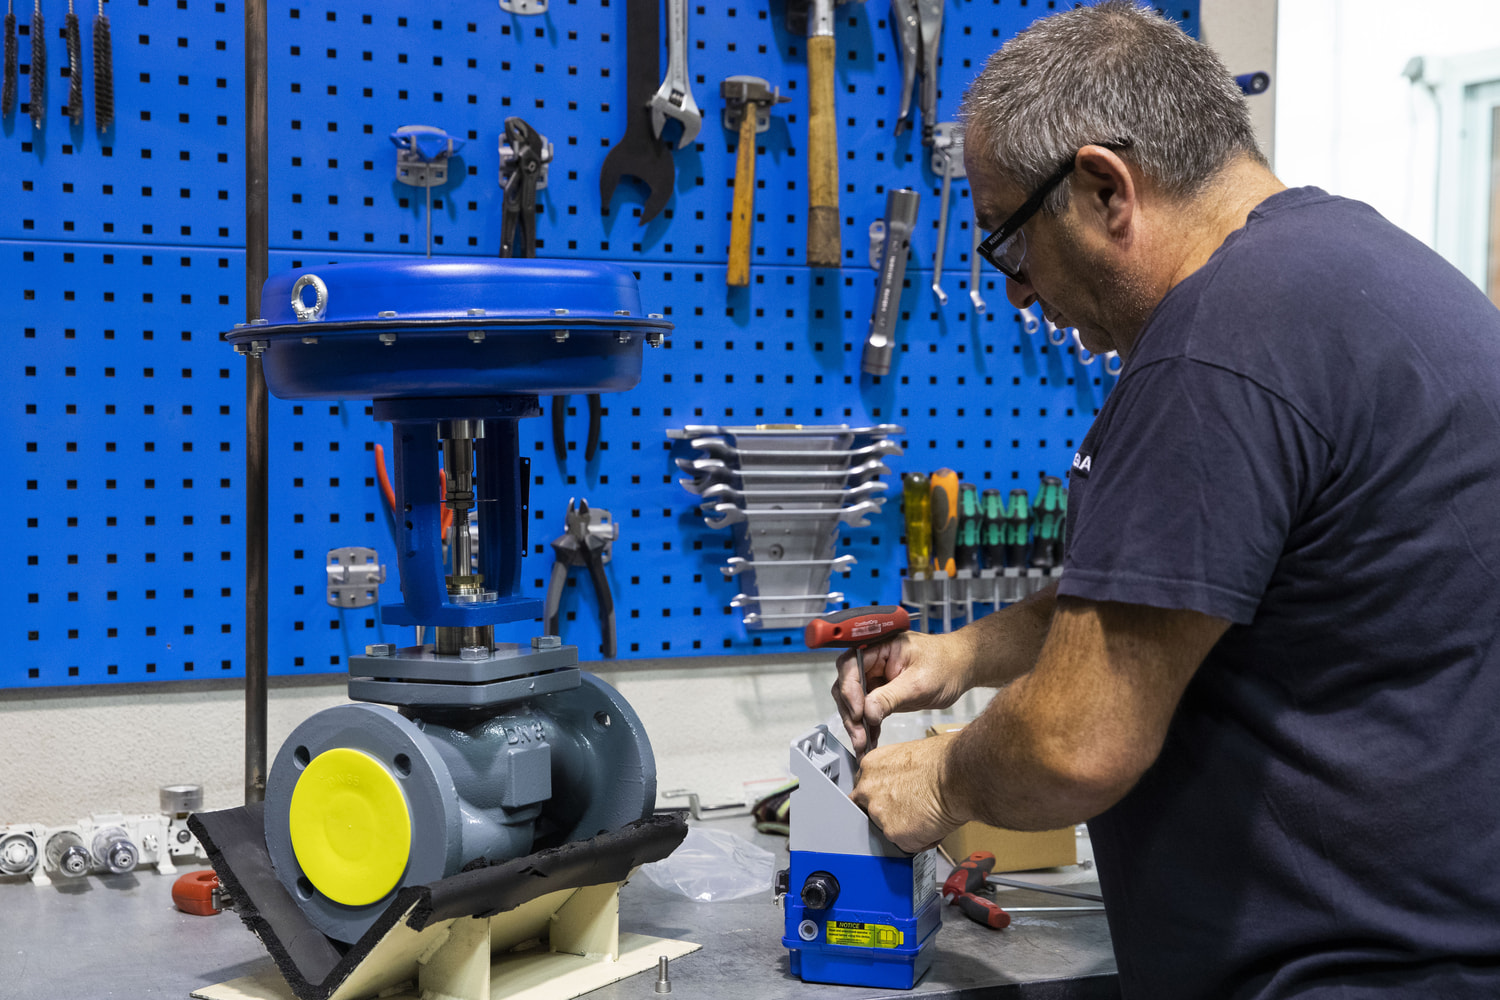 An employee is standing at a work bench and working on a product.